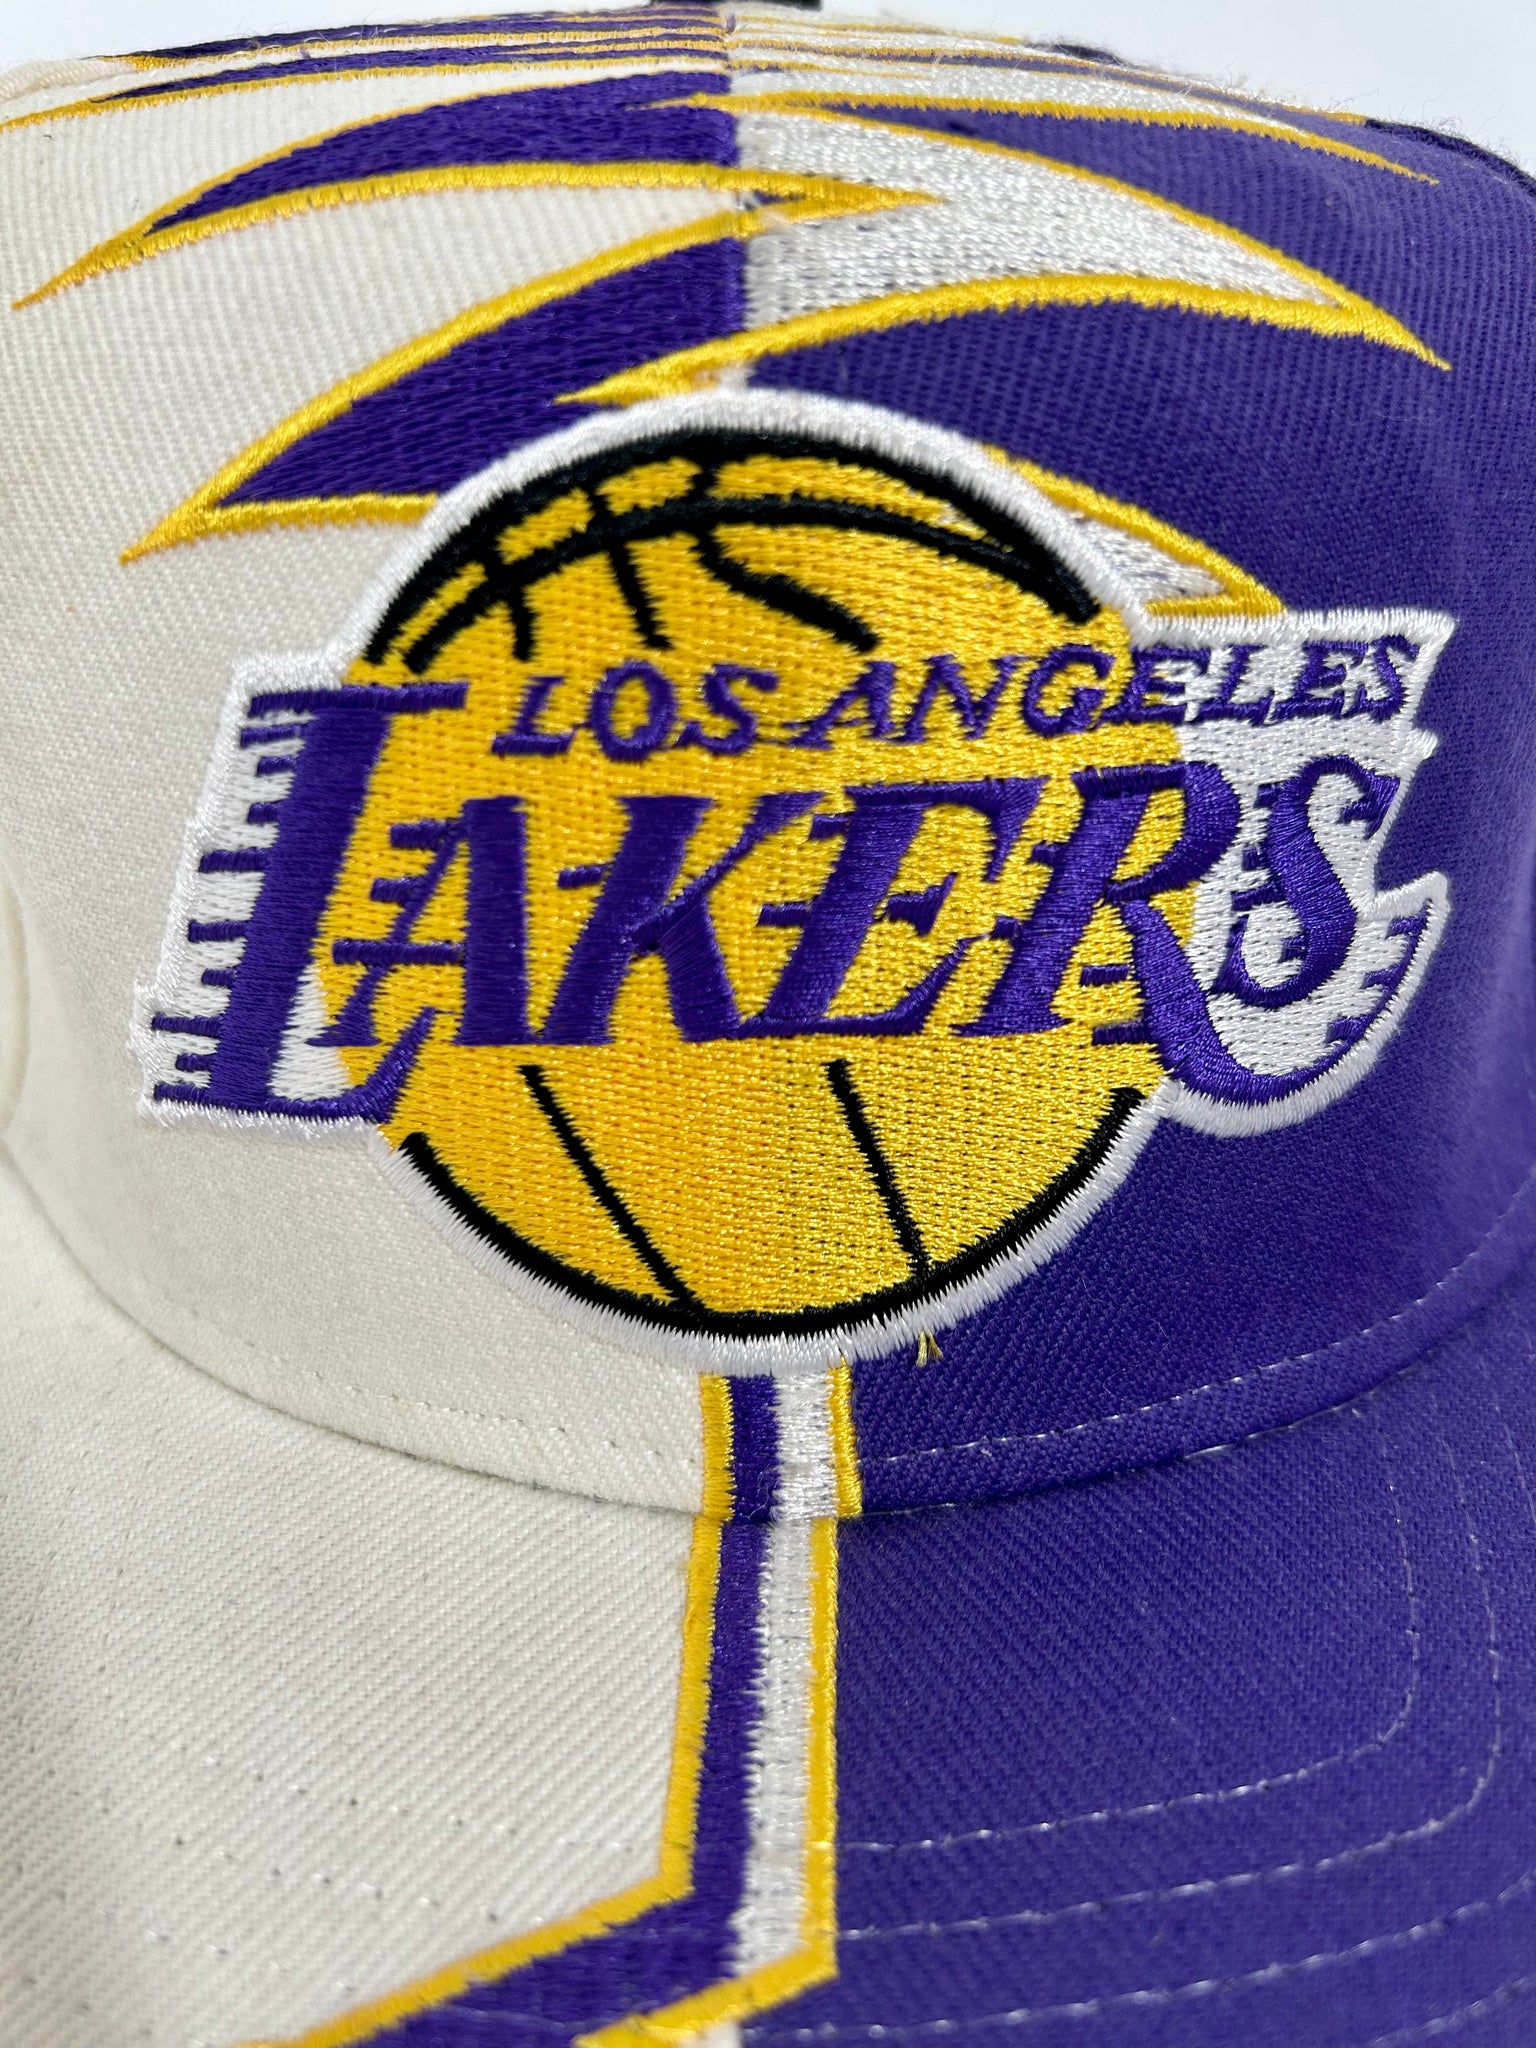 Los Angeles Lakers Signed Hats, Collectible Lakers Hats